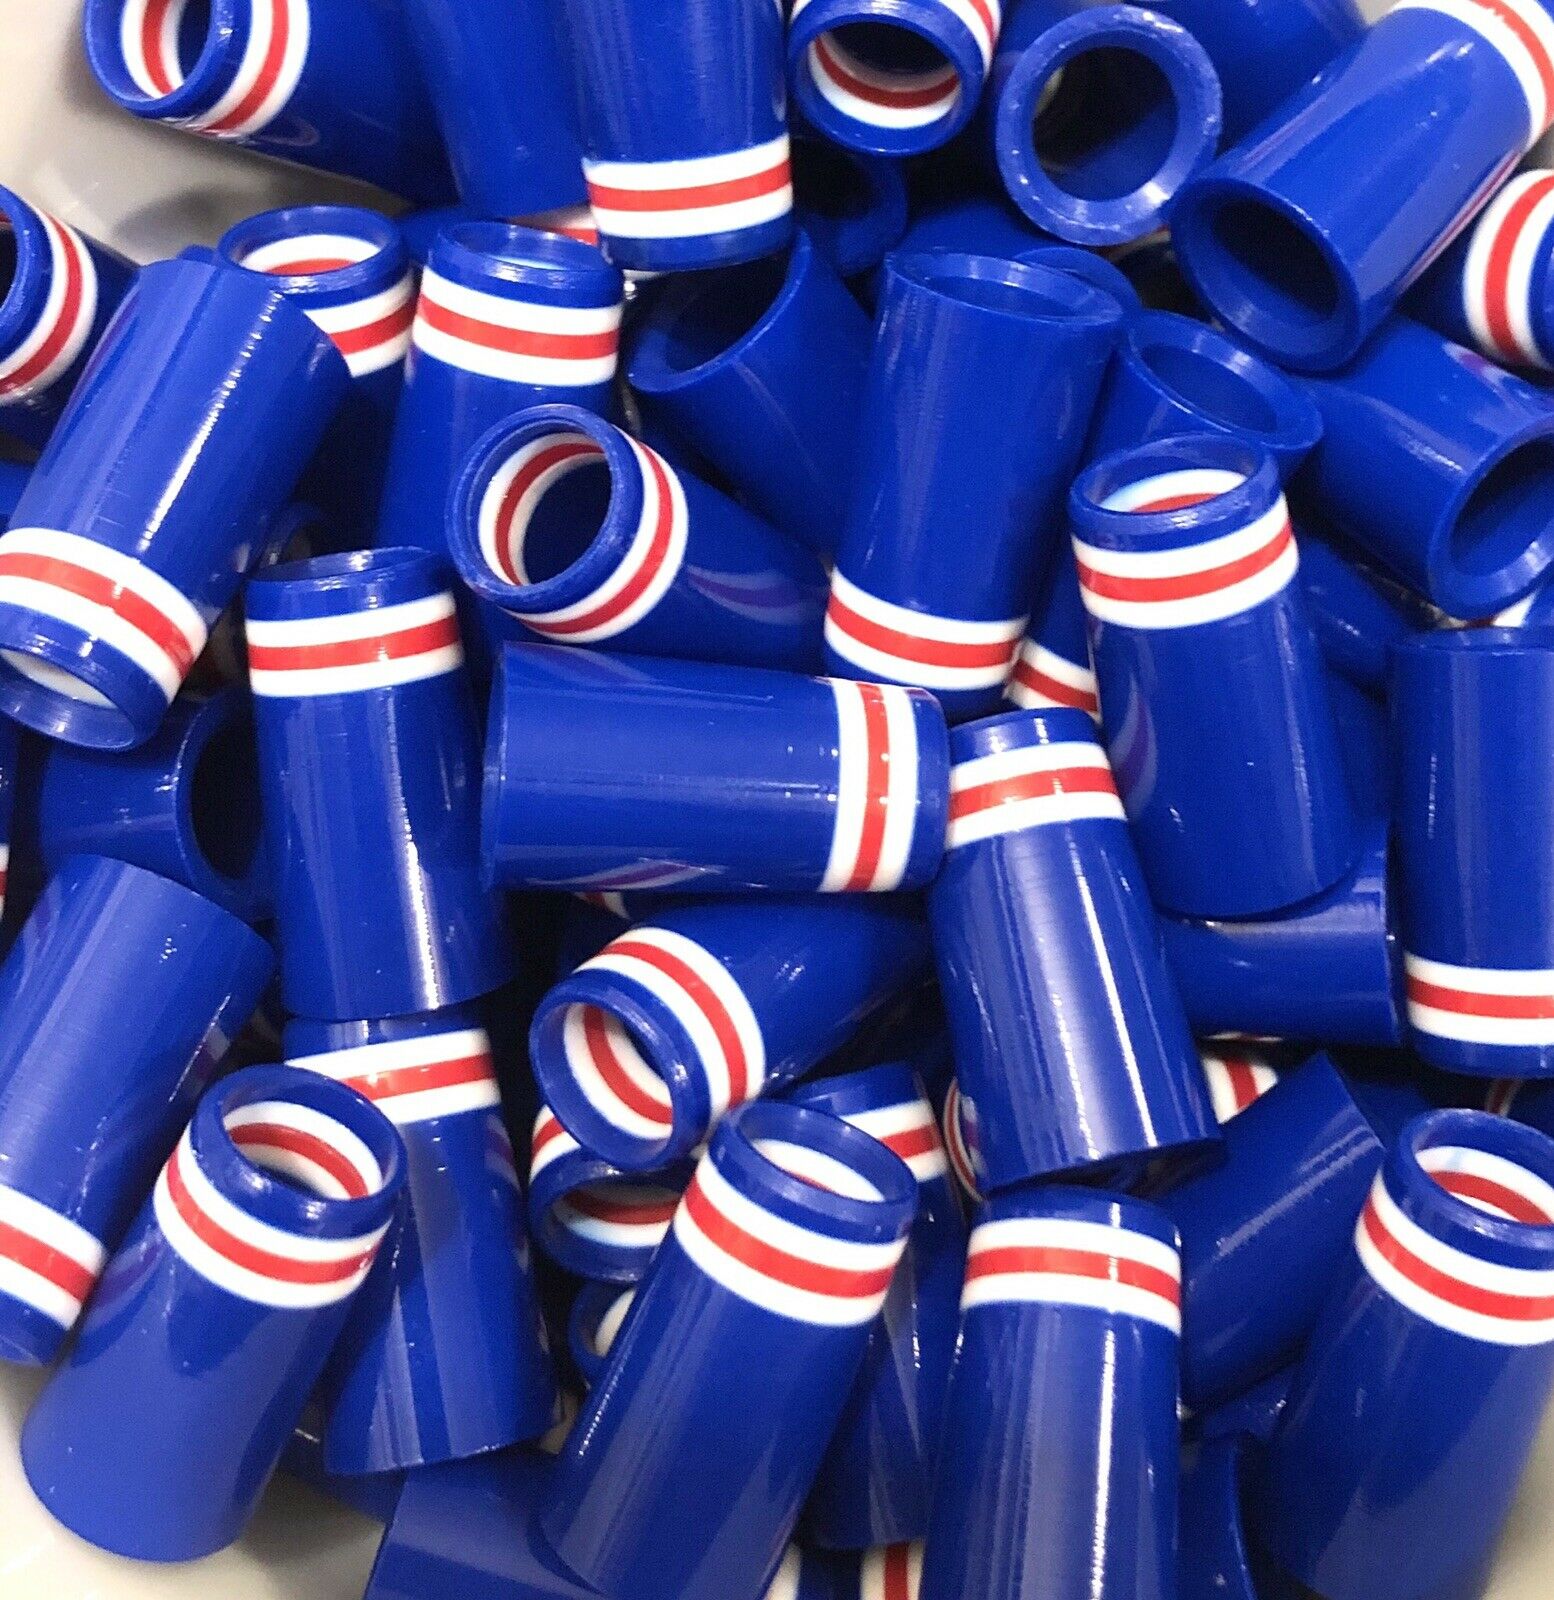 Premium Quality Iron Ferrules Blue w/ White & Red Rings 1” - The Golf Club Trader